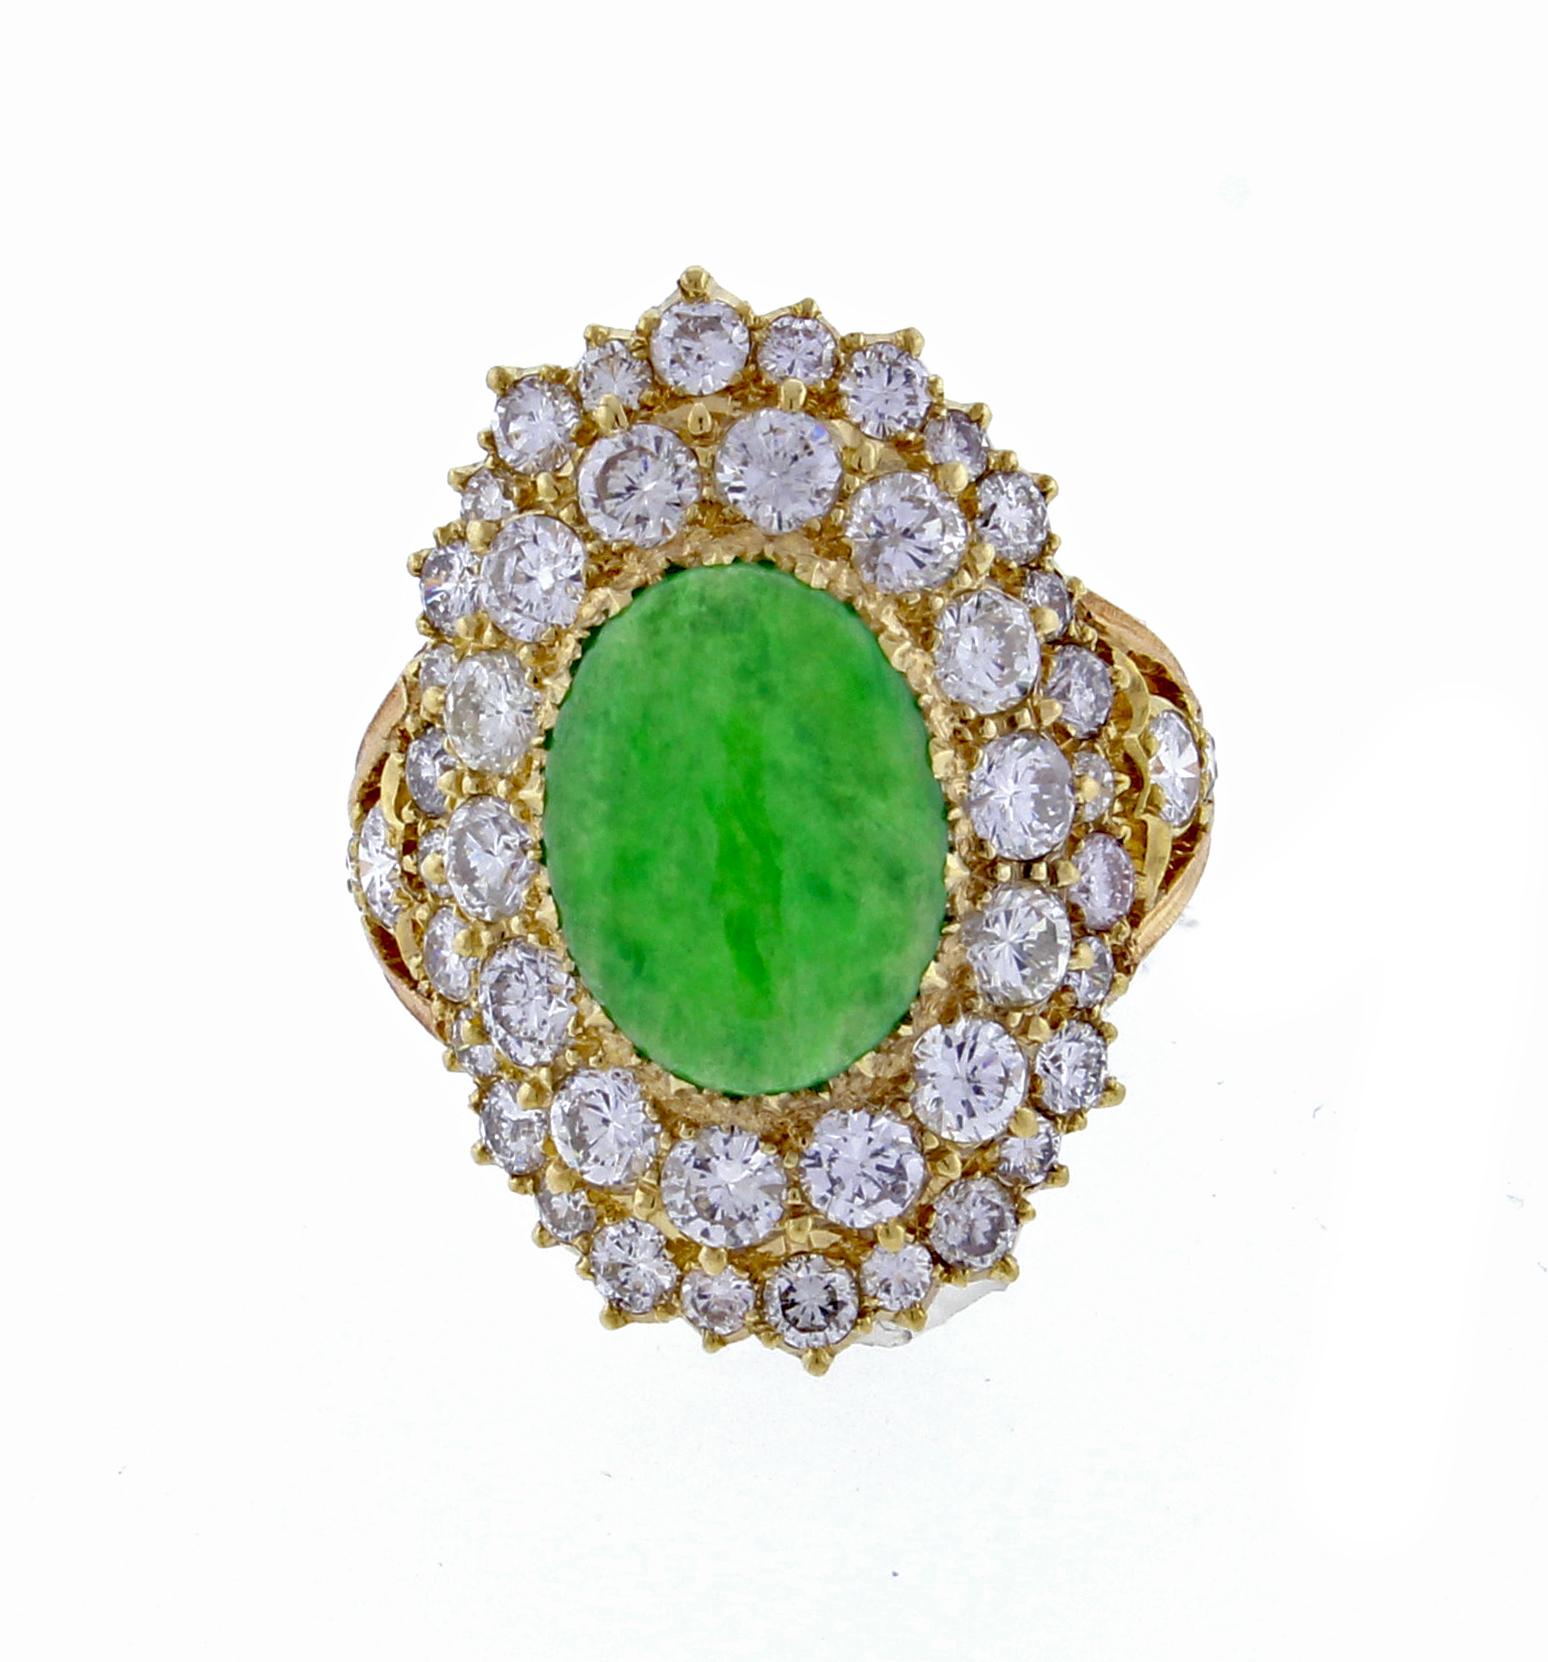 From Italian designer Buccellati, an impressive jade and diamond rising.   The ring features an oval jadeite jade cabochon measureing 12*9.mm and 46 brilliant diamonds weighing approximately 3.15 carats. Handmade by Buccellati in 18 karat pink and